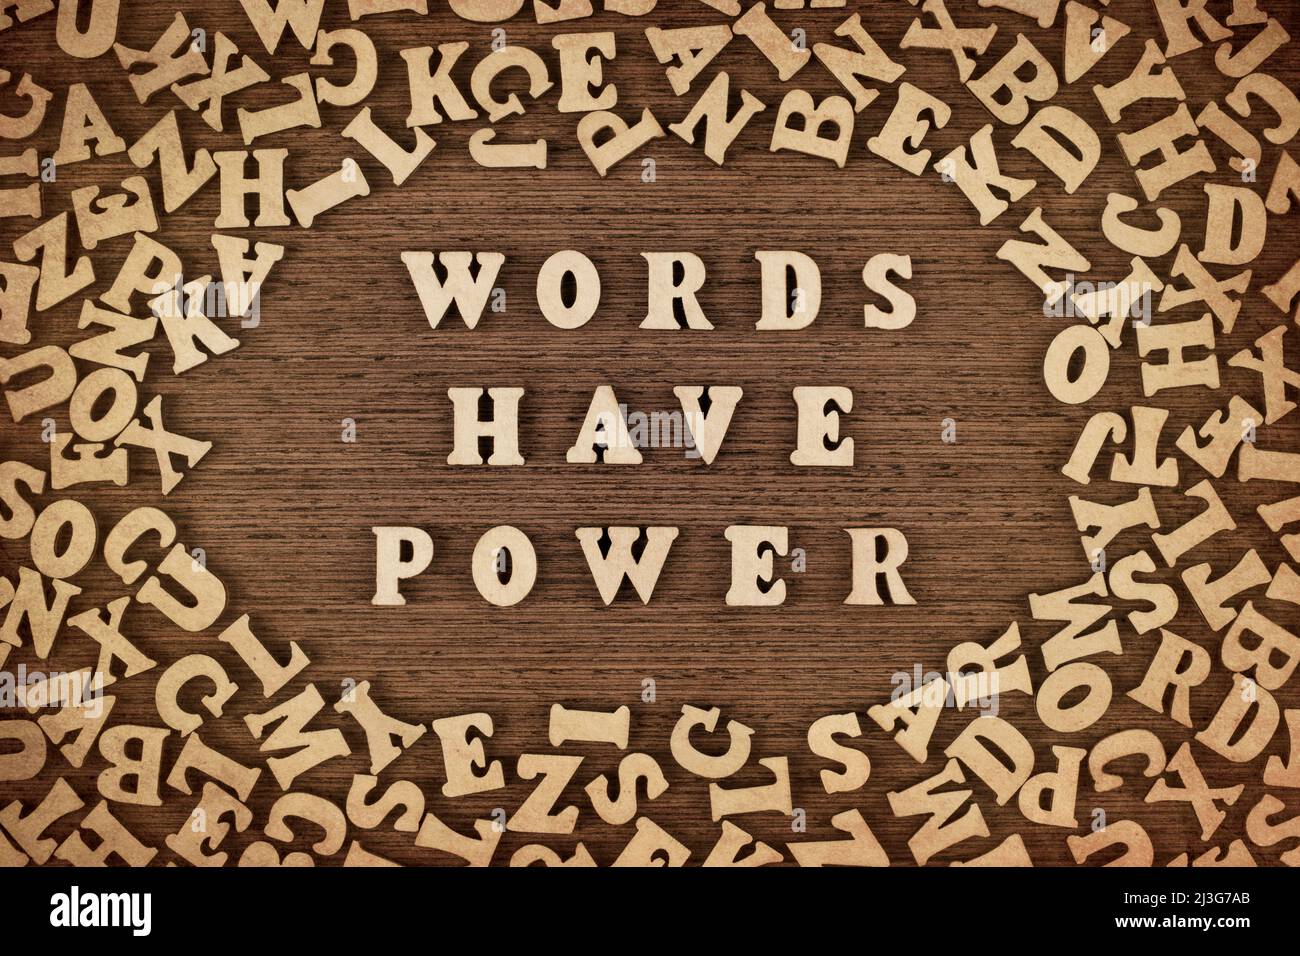 Words have power phrase made with wooden letters on table, concept. Stock Photo